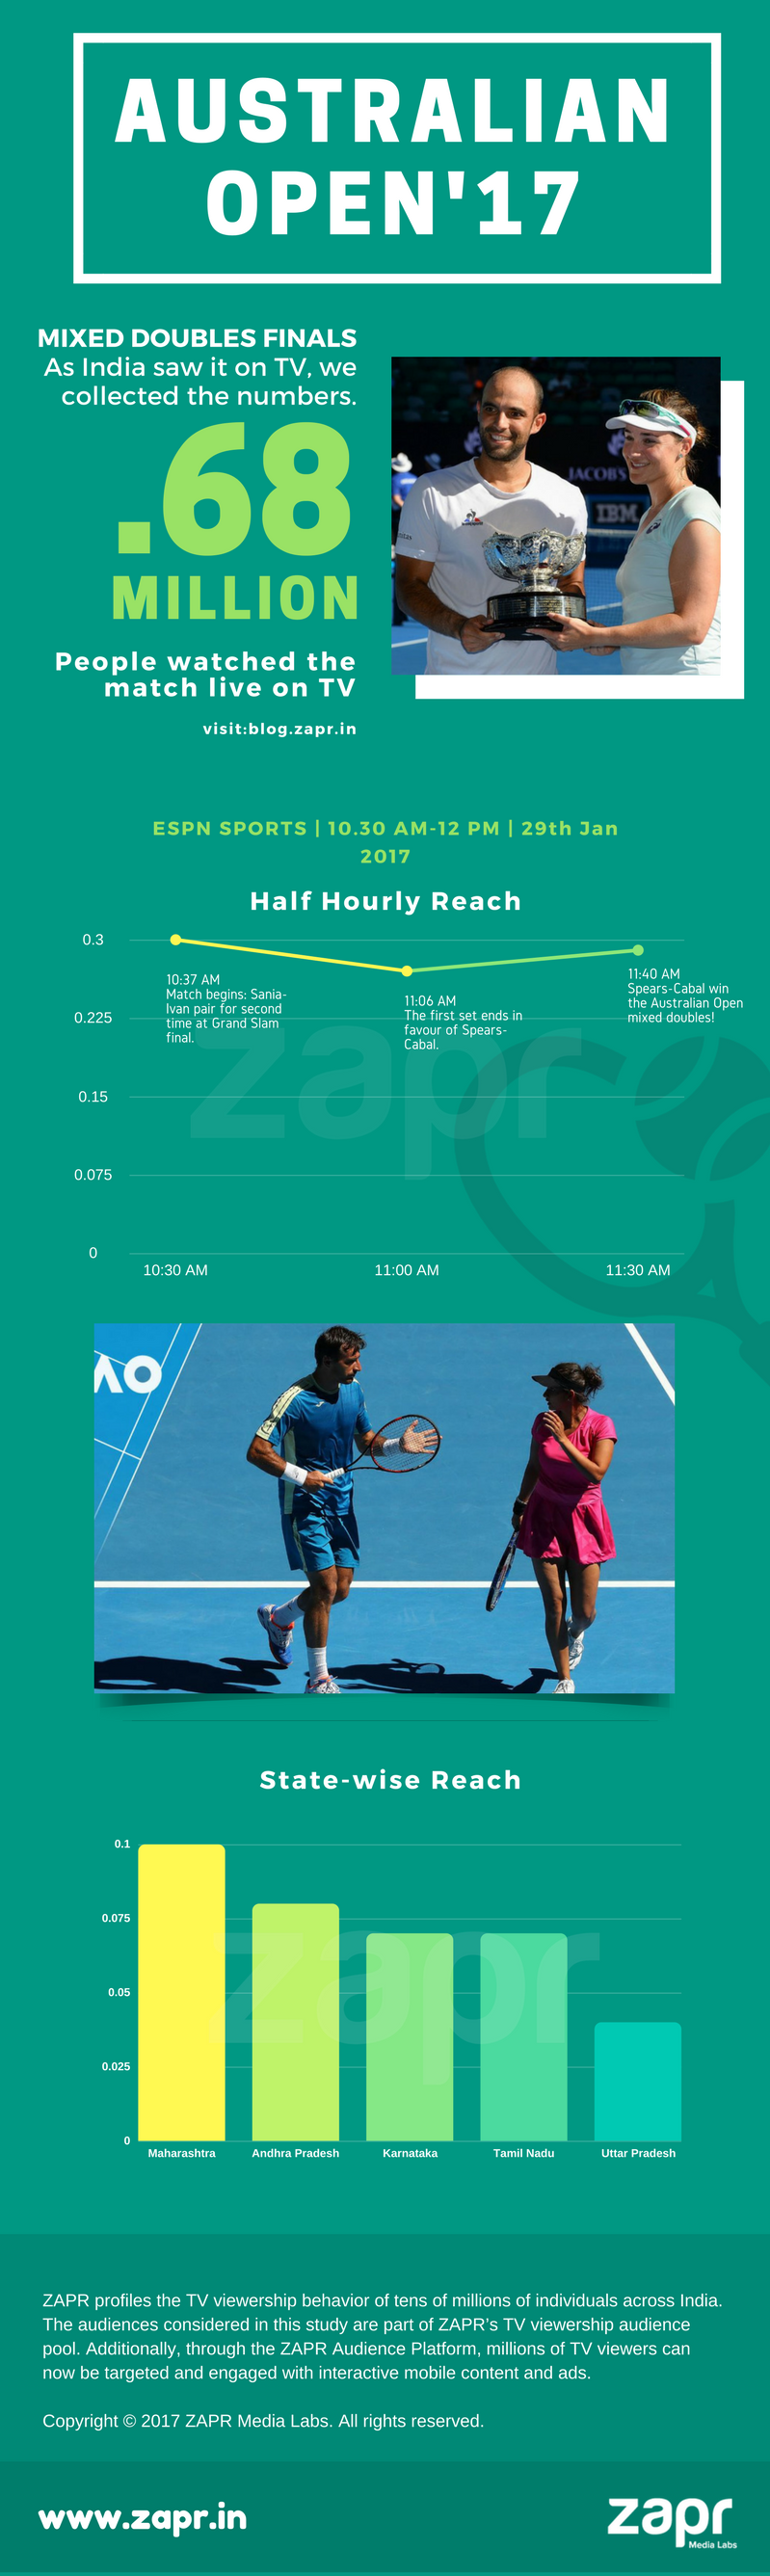 New_AO_Mixed Doubles Finals.png